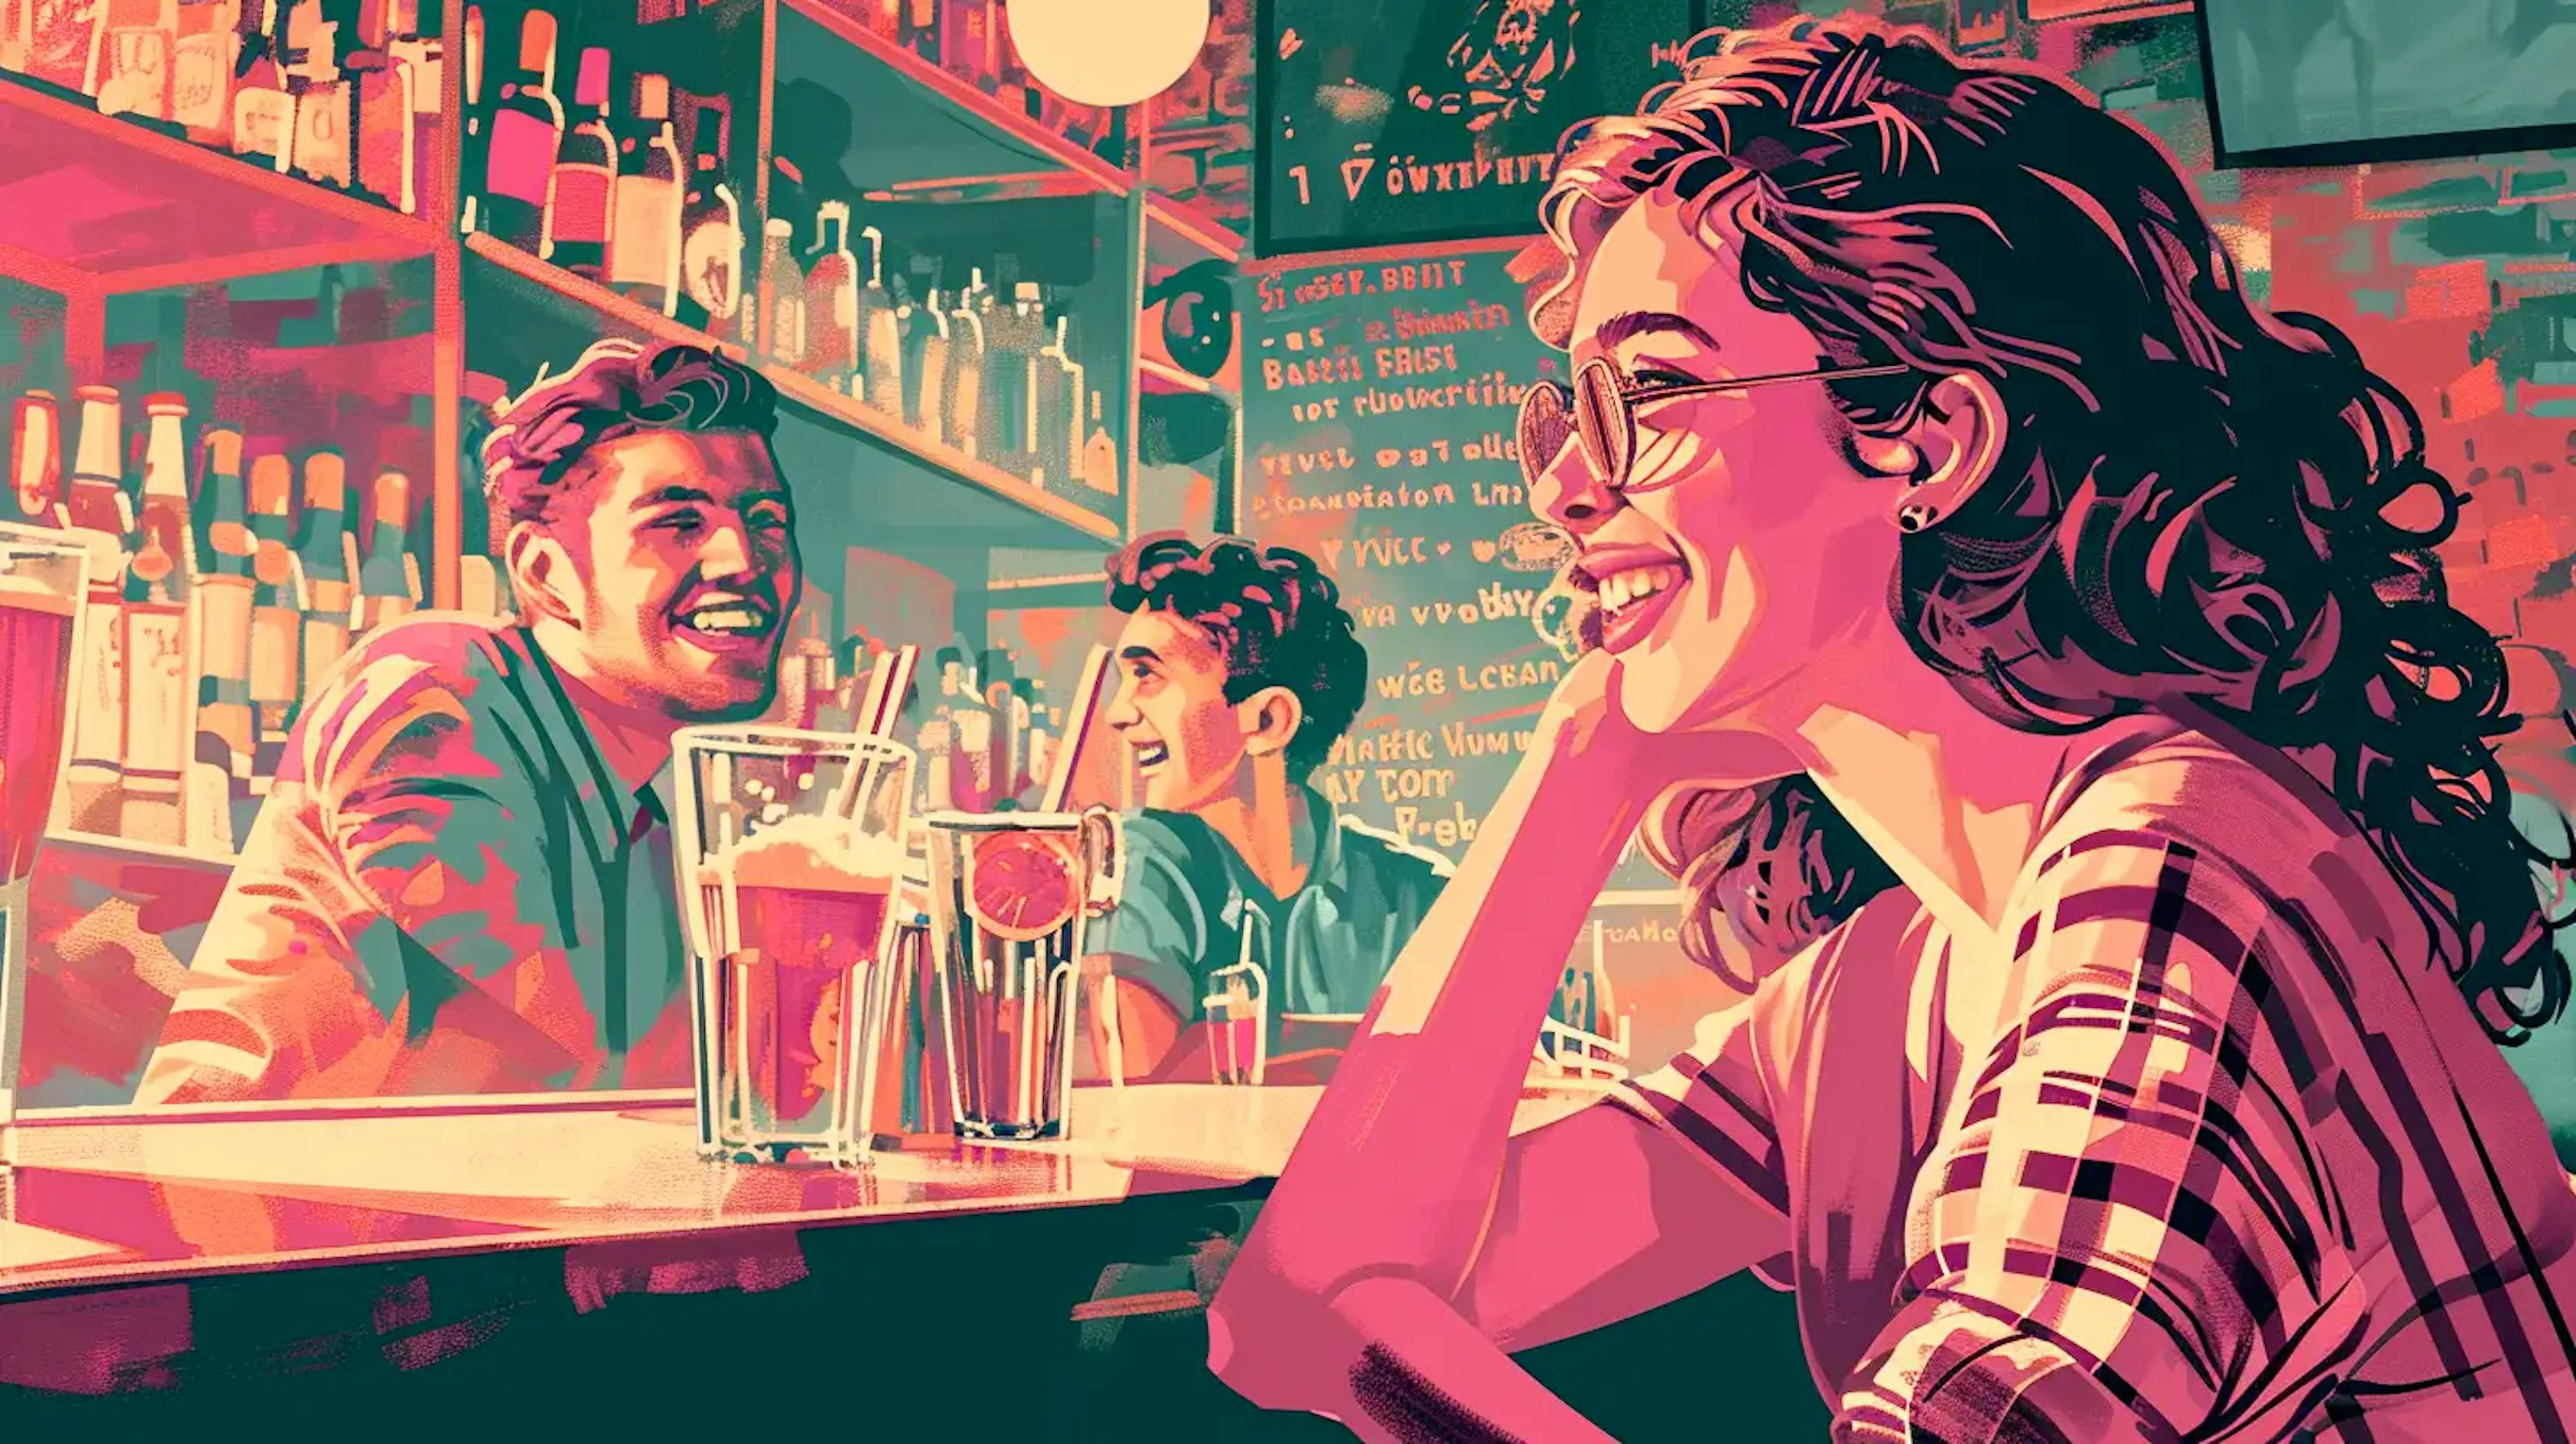 An illustration of a woman enjoying a cocktail at a restaurant counter.